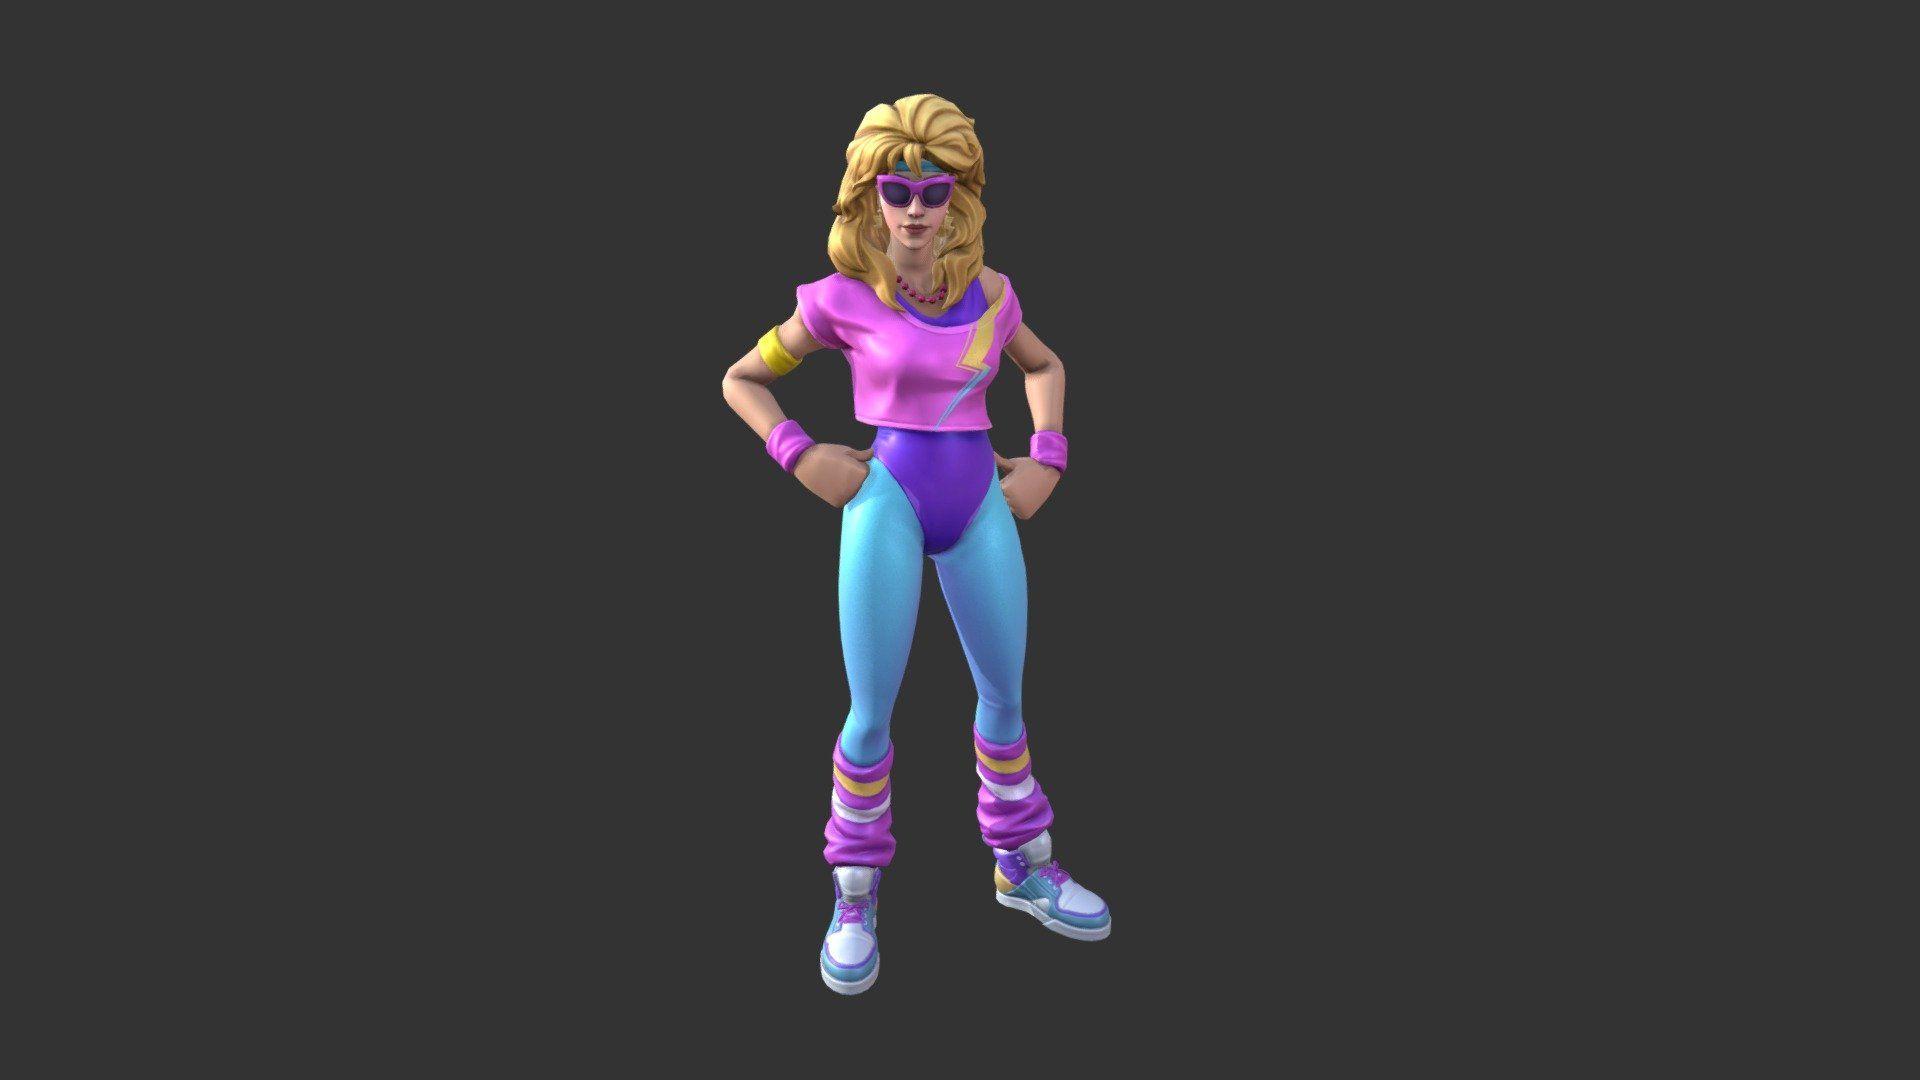 Aerobic Assassin Outfit model